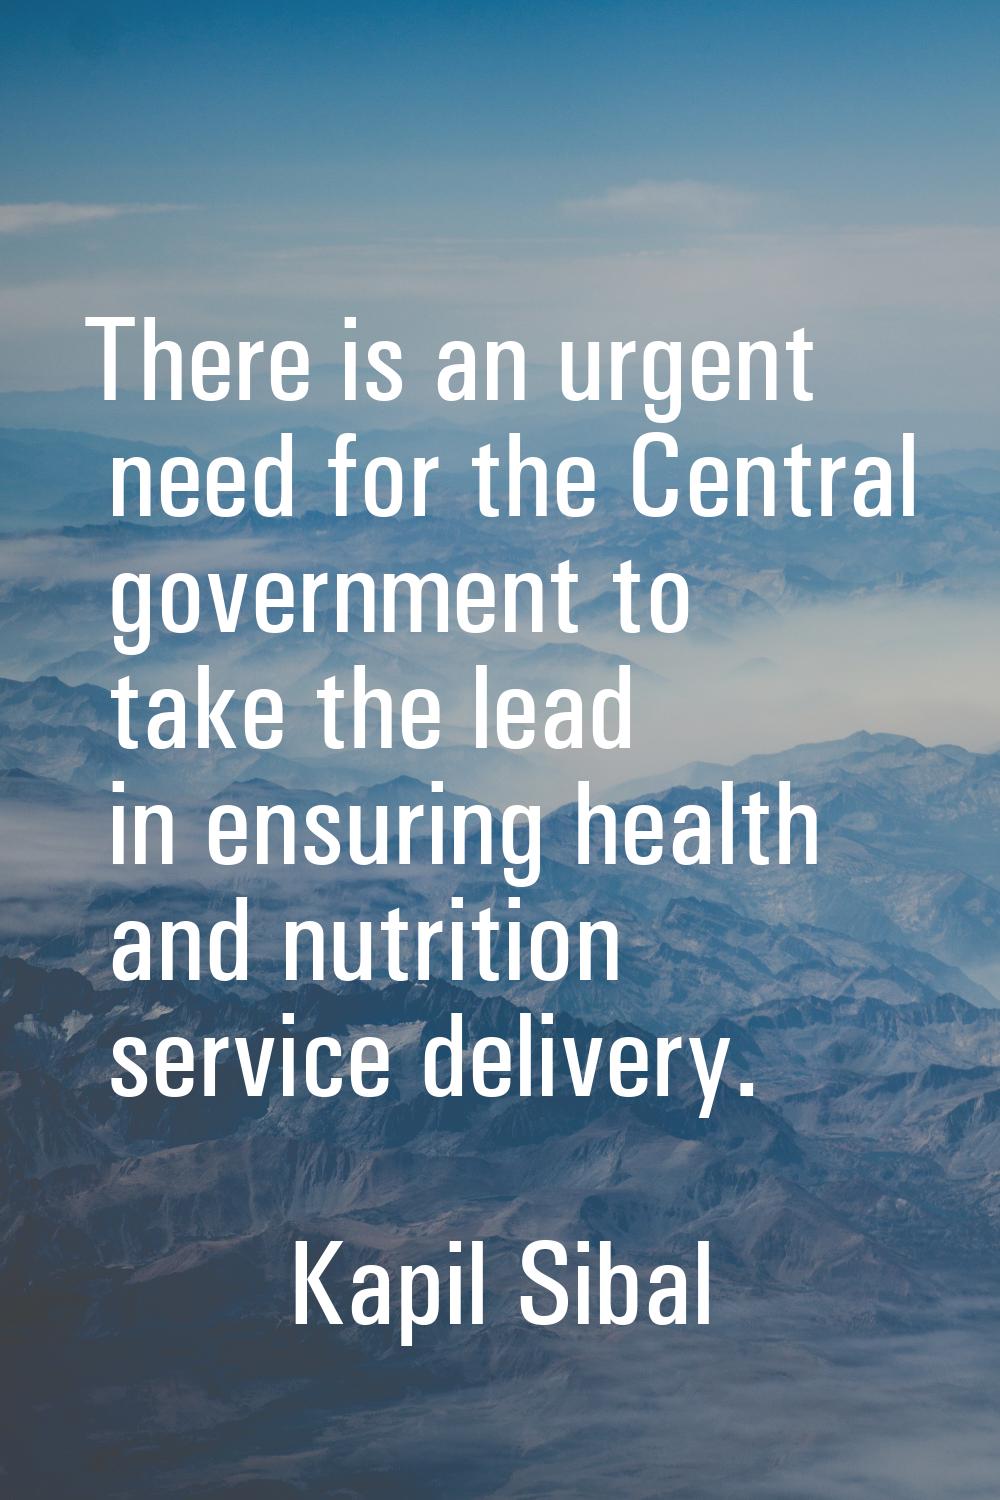 There is an urgent need for the Central government to take the lead in ensuring health and nutritio